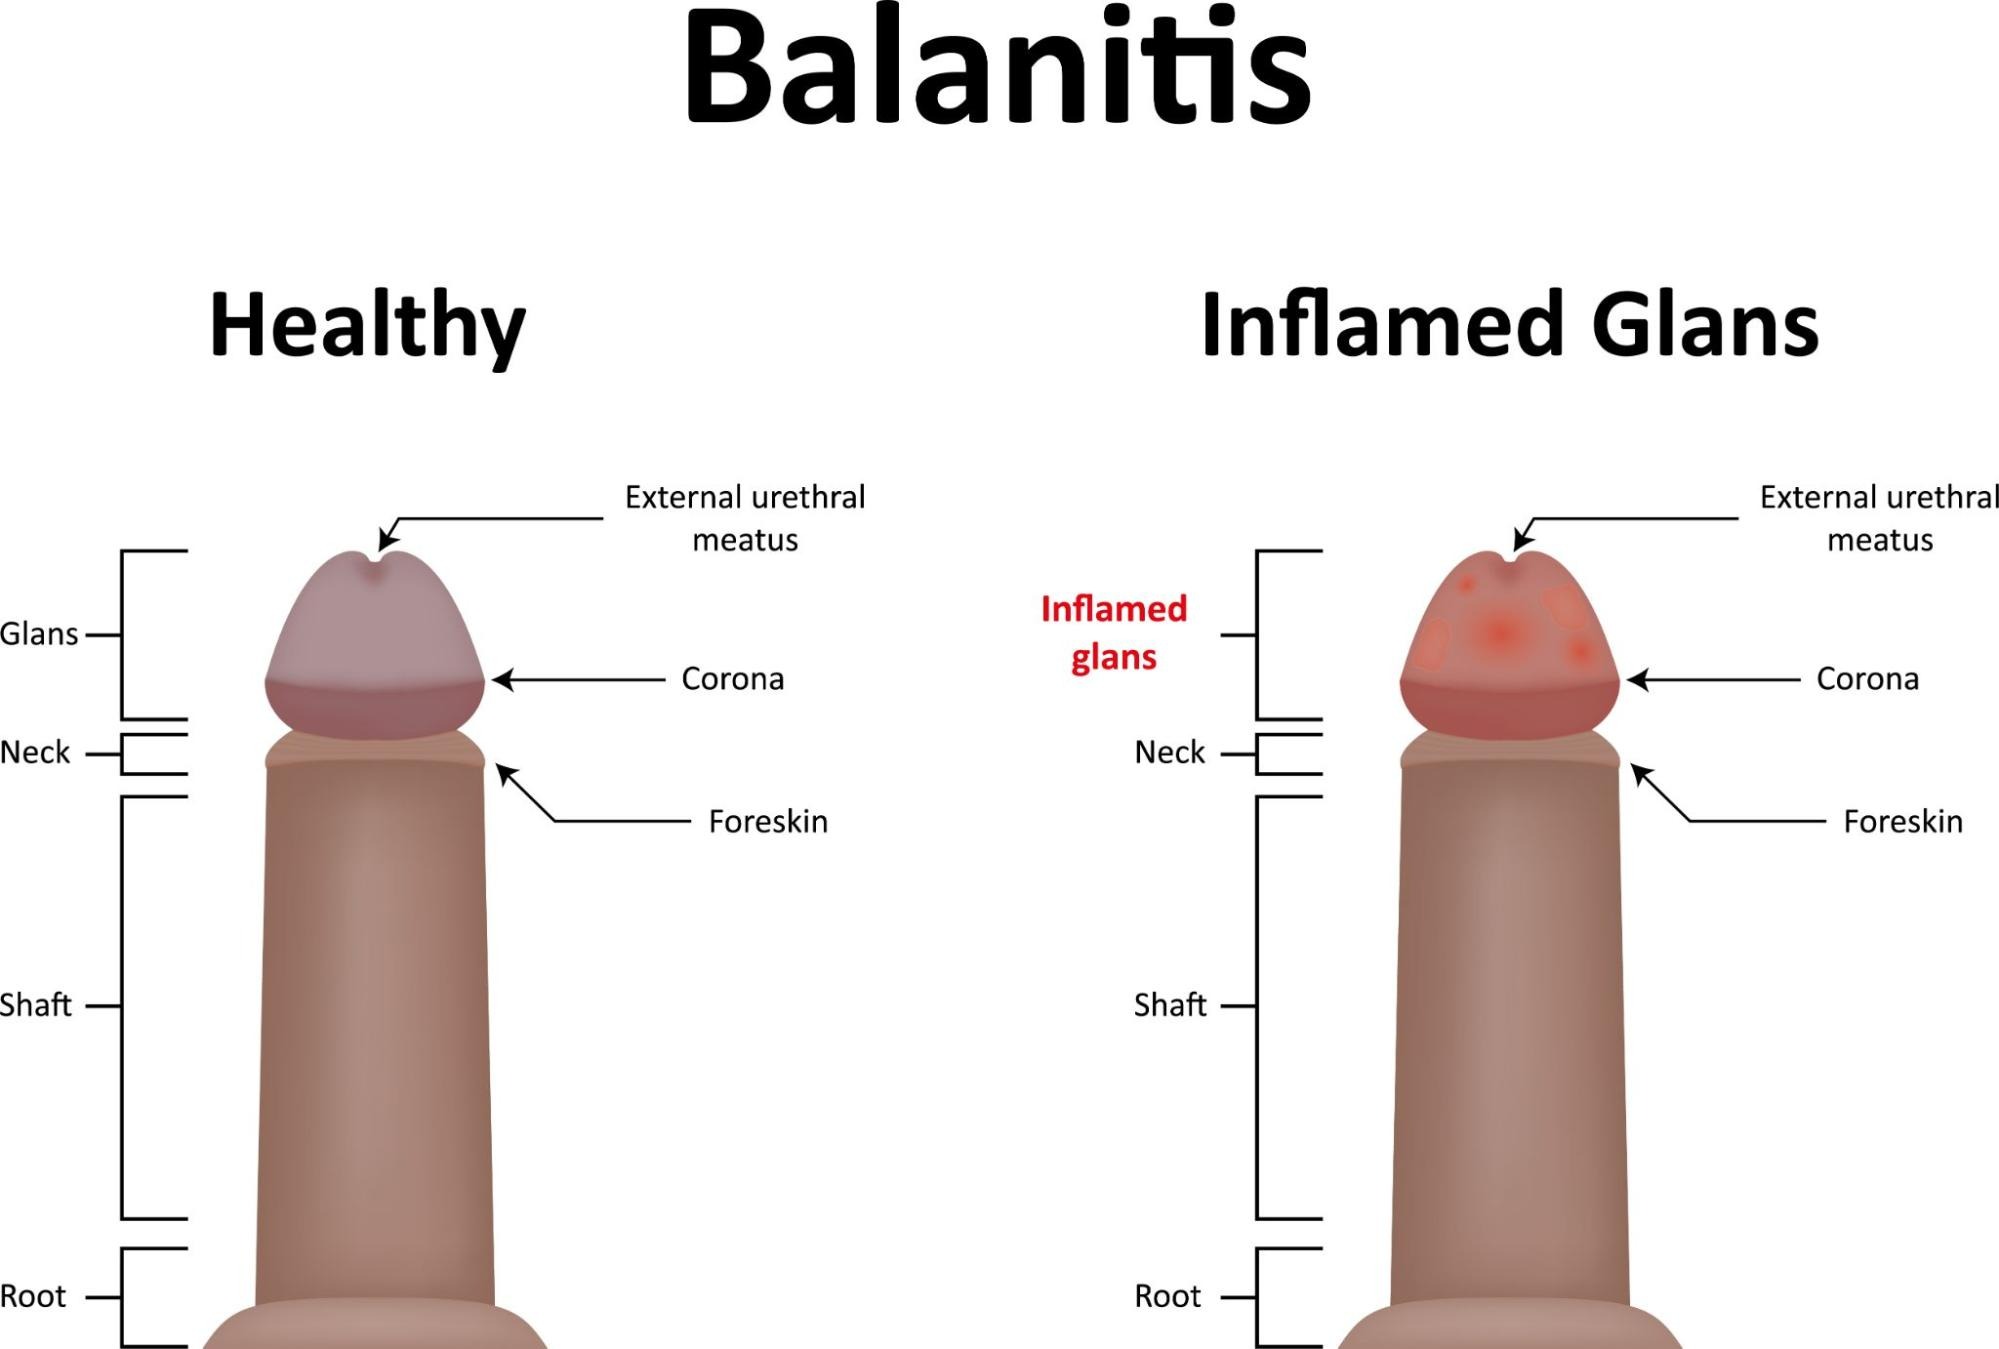 What Is The Permanent Treatment For Recurrent Balanitis?